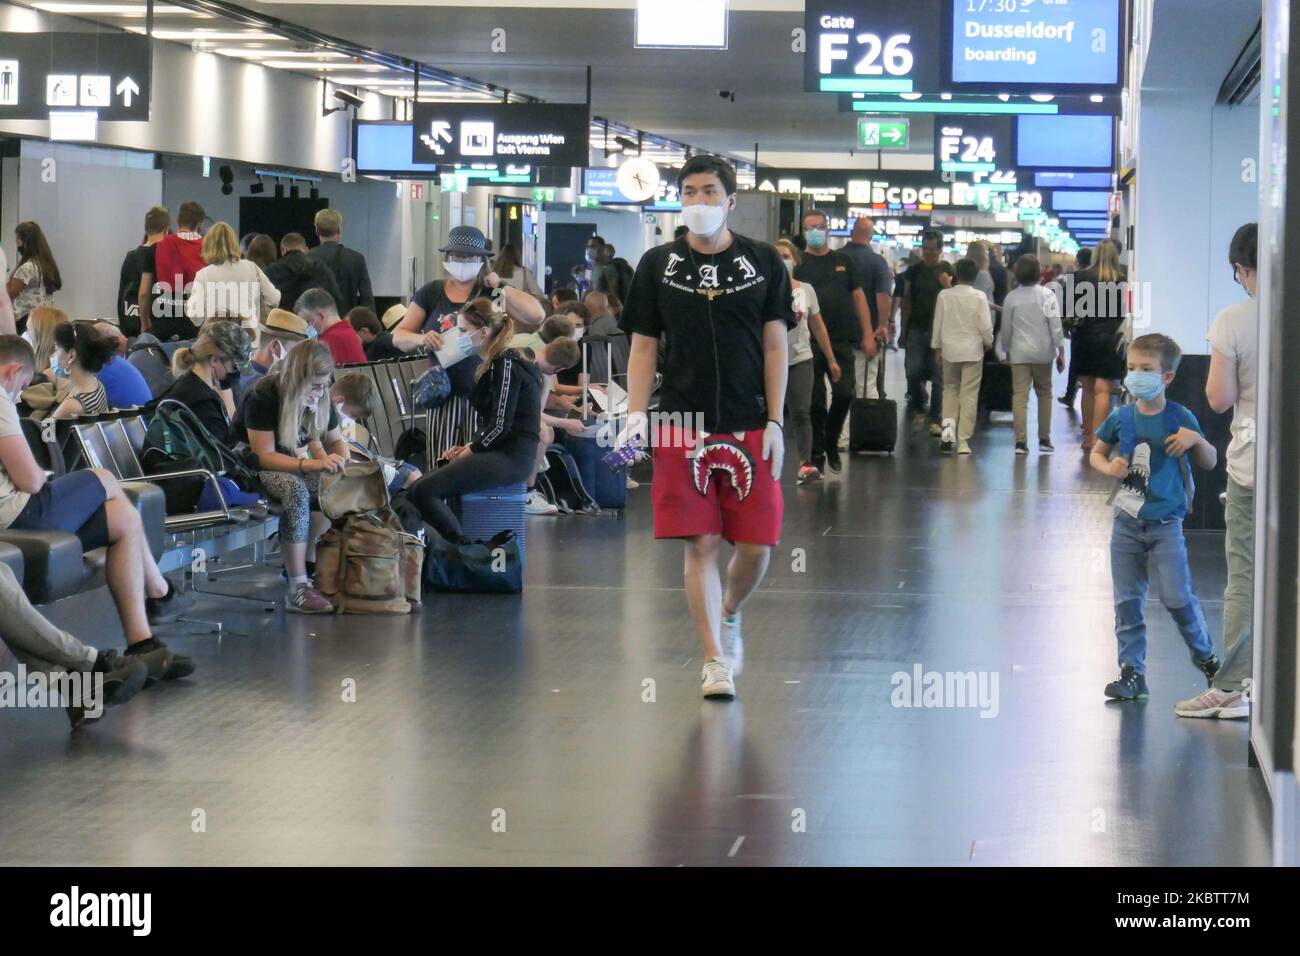 Passengers wearing facemasks, gloves and safety measures are seen on July 15, 2020 at the terminal, F Gates area of Vienna International Airport VIE LOWW - Flughafen Wien-Schwechat serving the Austrian Capital but also Bratislava as it is 55km away from the Slovak city during the Covid-19 Coronavirus pandemic era with social distancing measures and disinfecting hand sanitizer everywhere afther the lockdown period. On July 1, Austria issues travel warning for six Balkan states countries, Serbia, Montenegro, Bosnia Herzegovina, North Macedonia, Albania and Kosovo. Passengers traveling from those Stock Photo